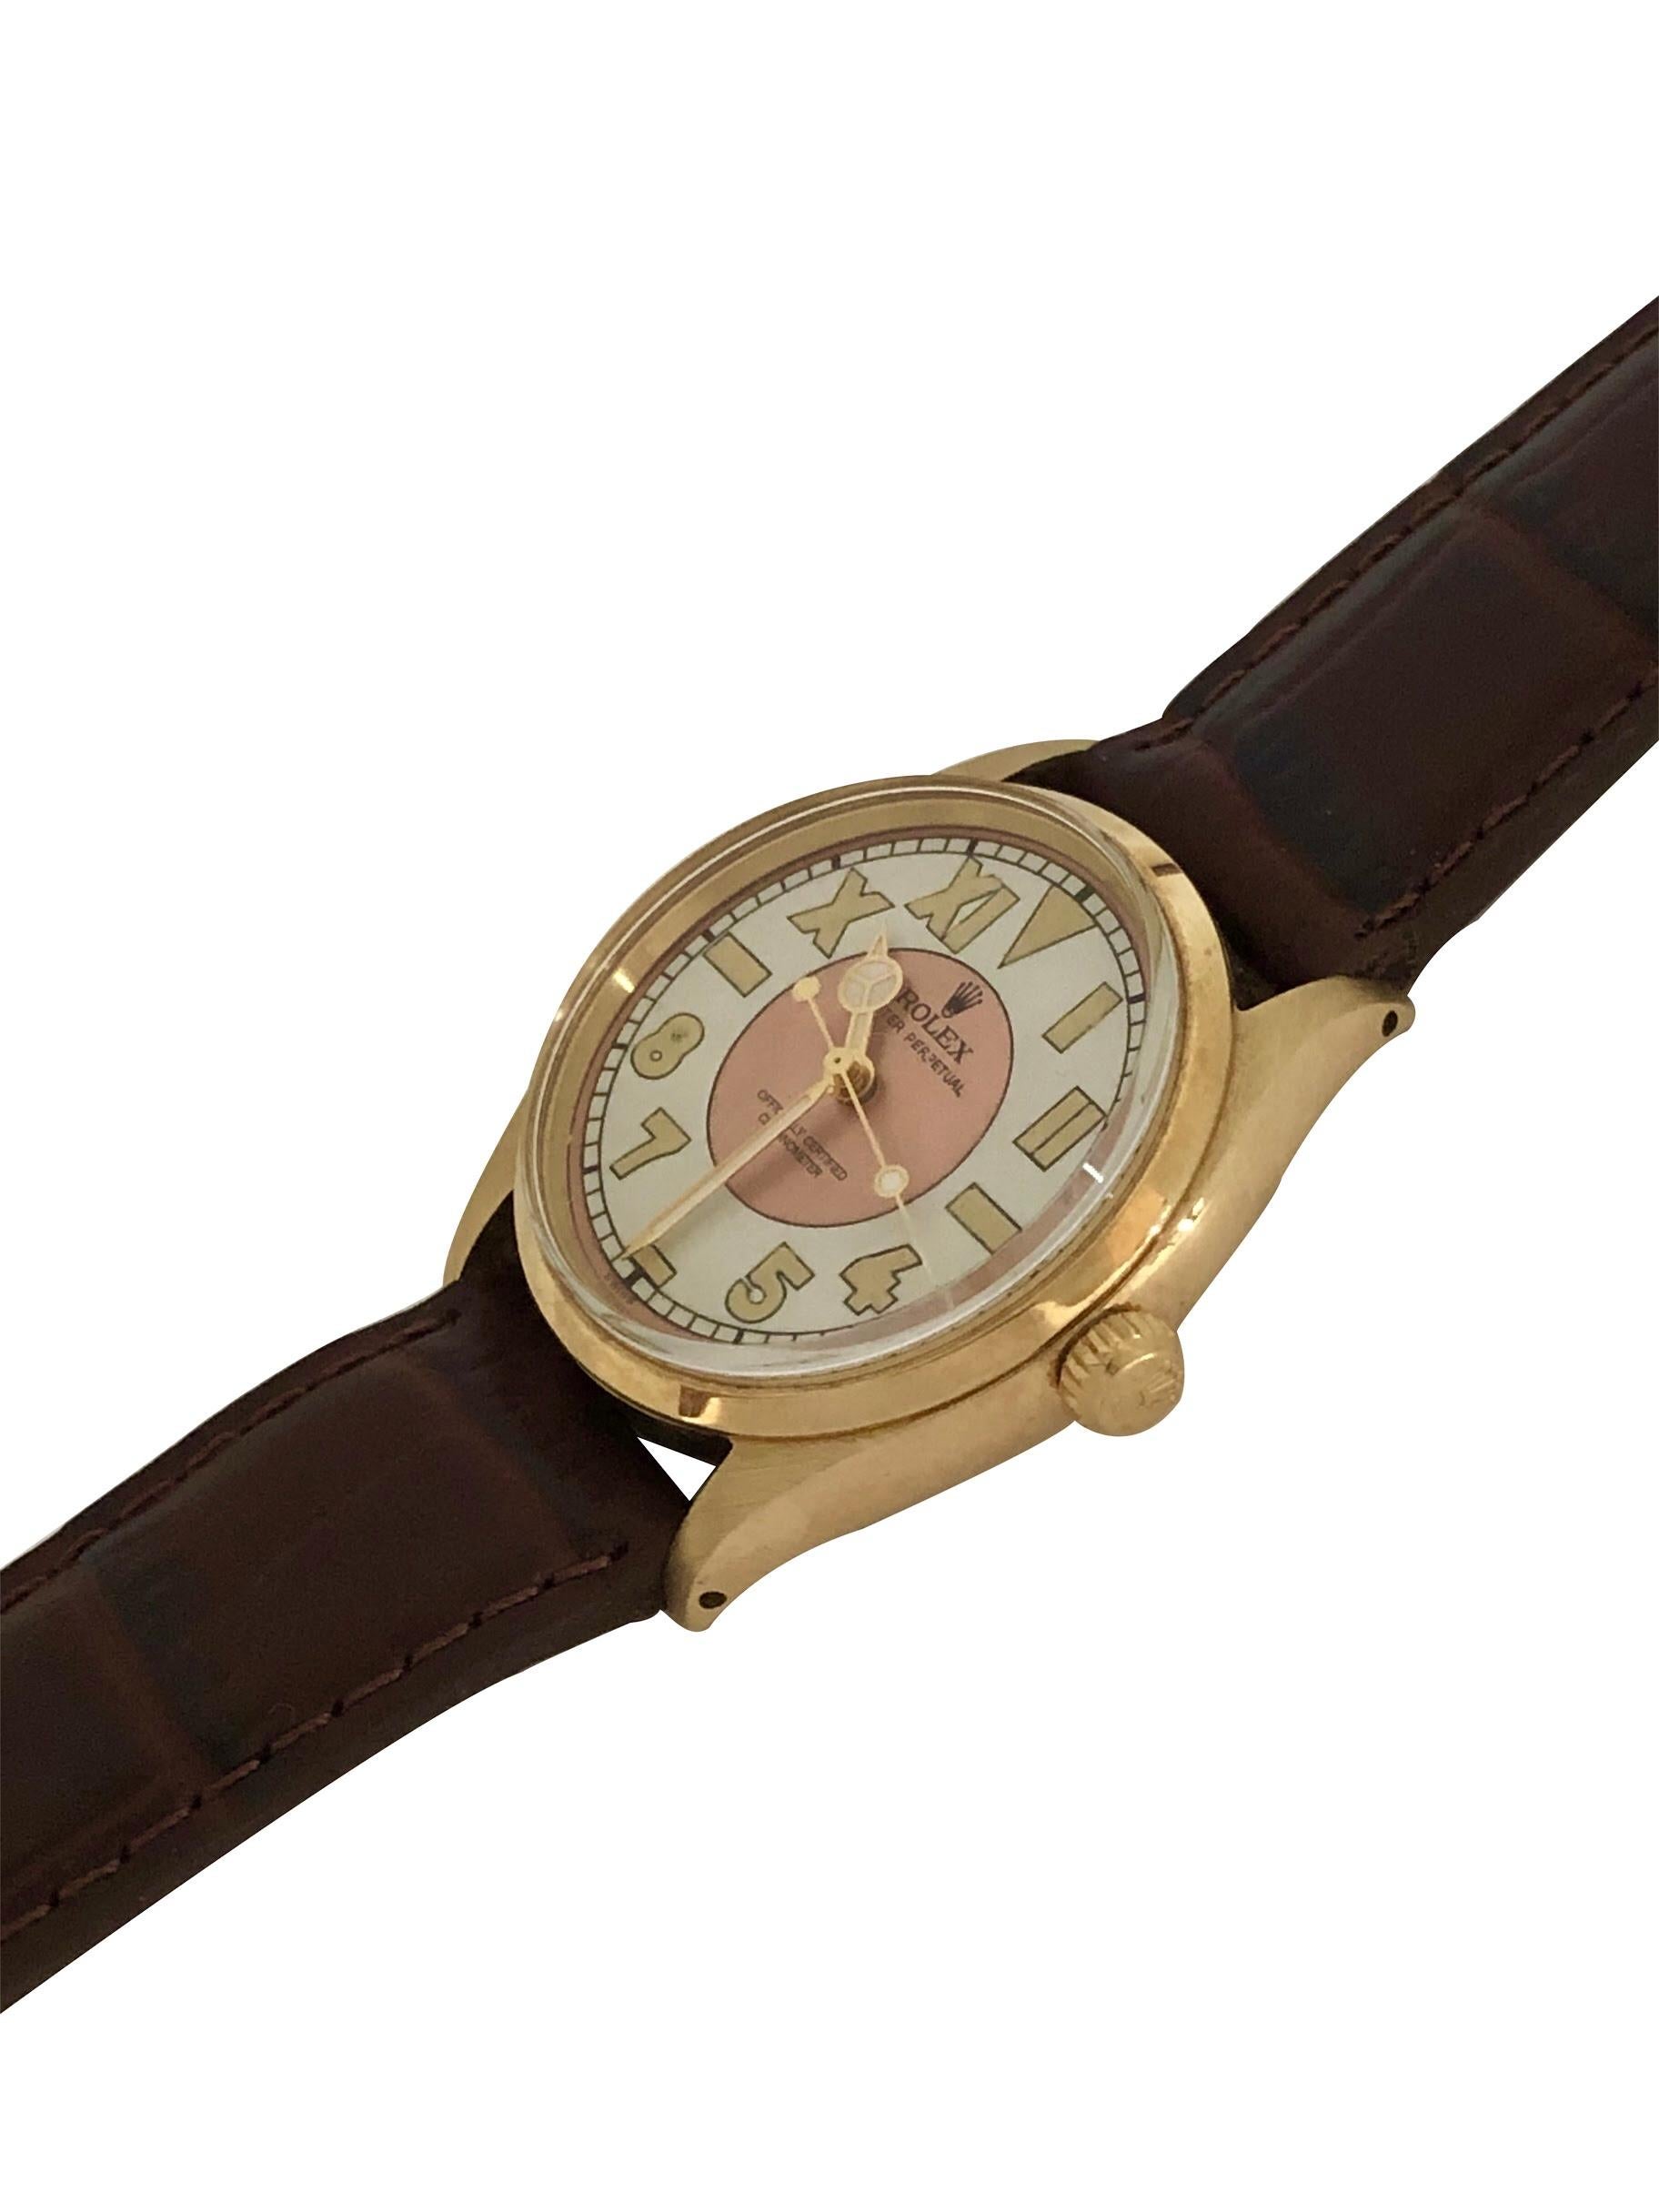 Circa 1945 Rolex Oyster Perpetual Reference 6567 Wrist Watch, 34 M.M 14K yellow Gold 3 piece case with smooth bezel. Caliber 1030 Automatic, self winding Nickle lever movement, Gold Rolex Logo Crown.  Custom Rose and White 